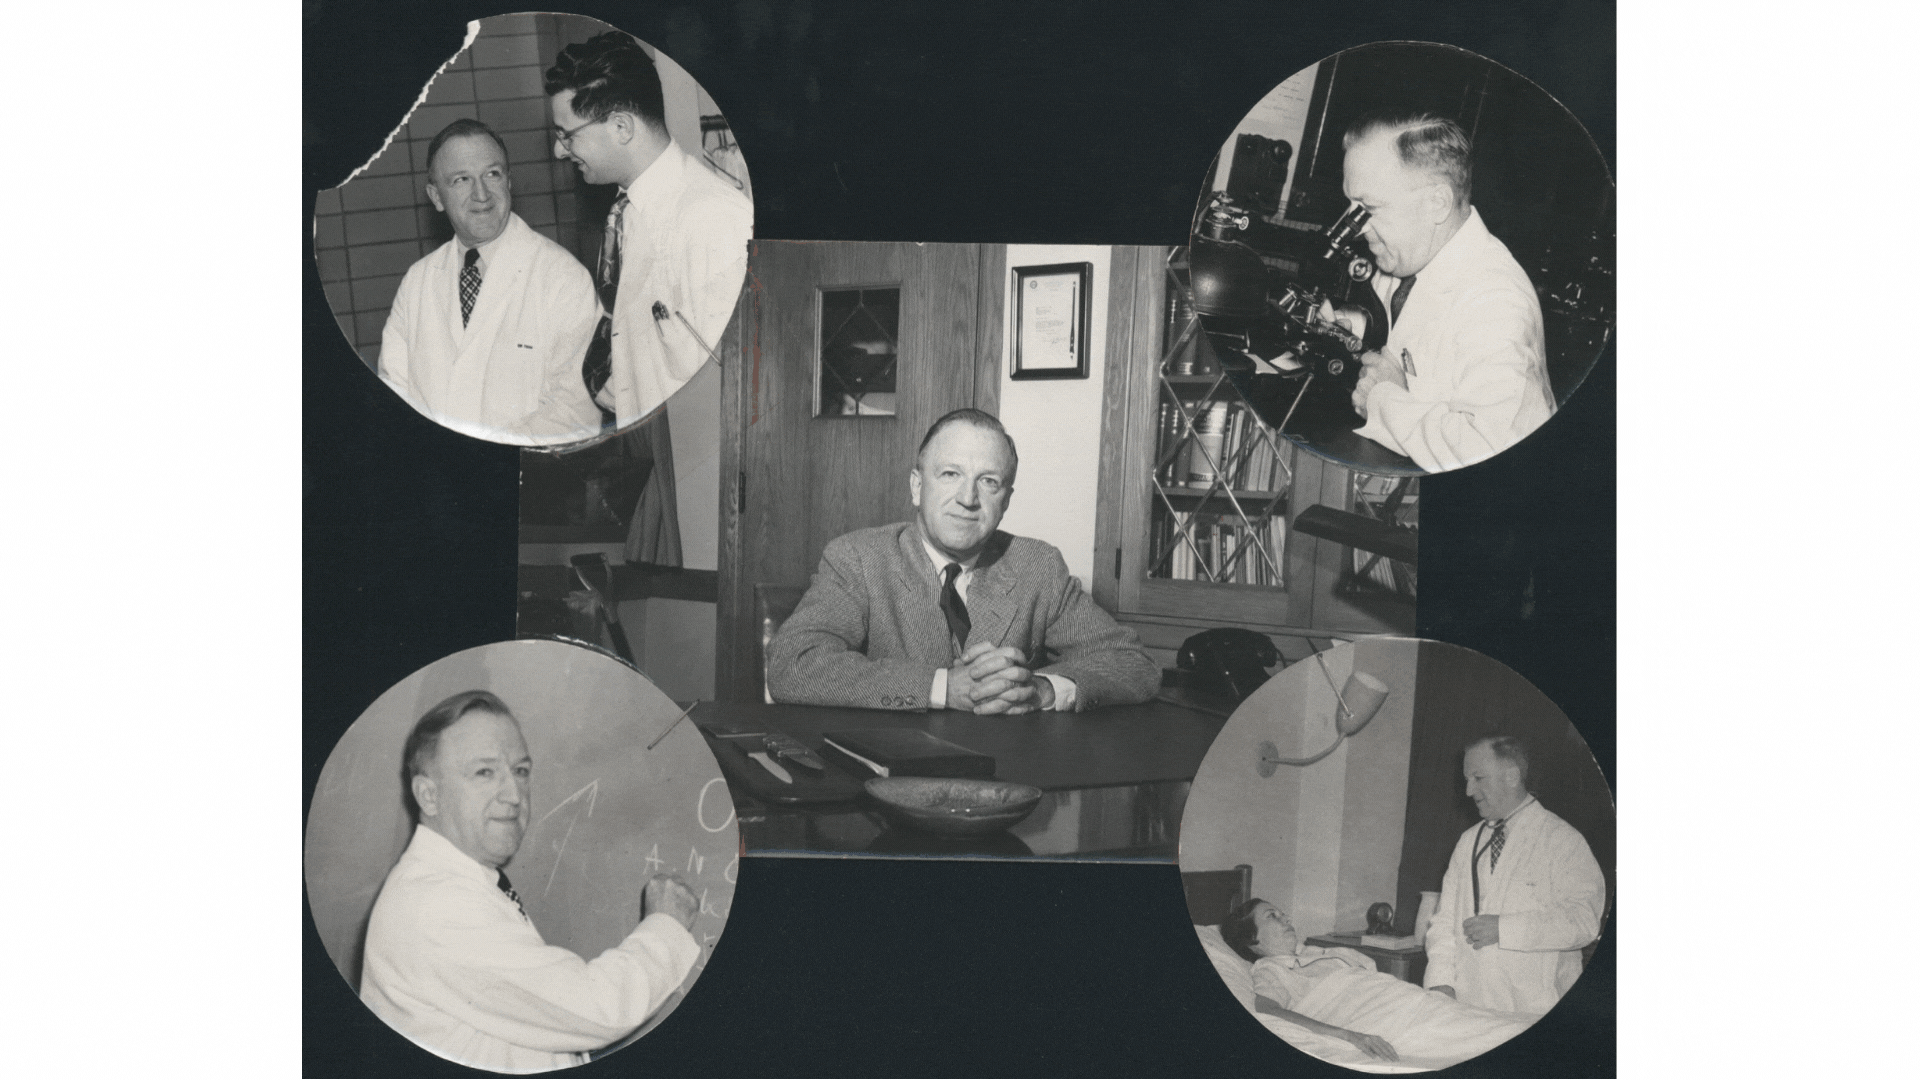 Images of Charles Doan throughout his career